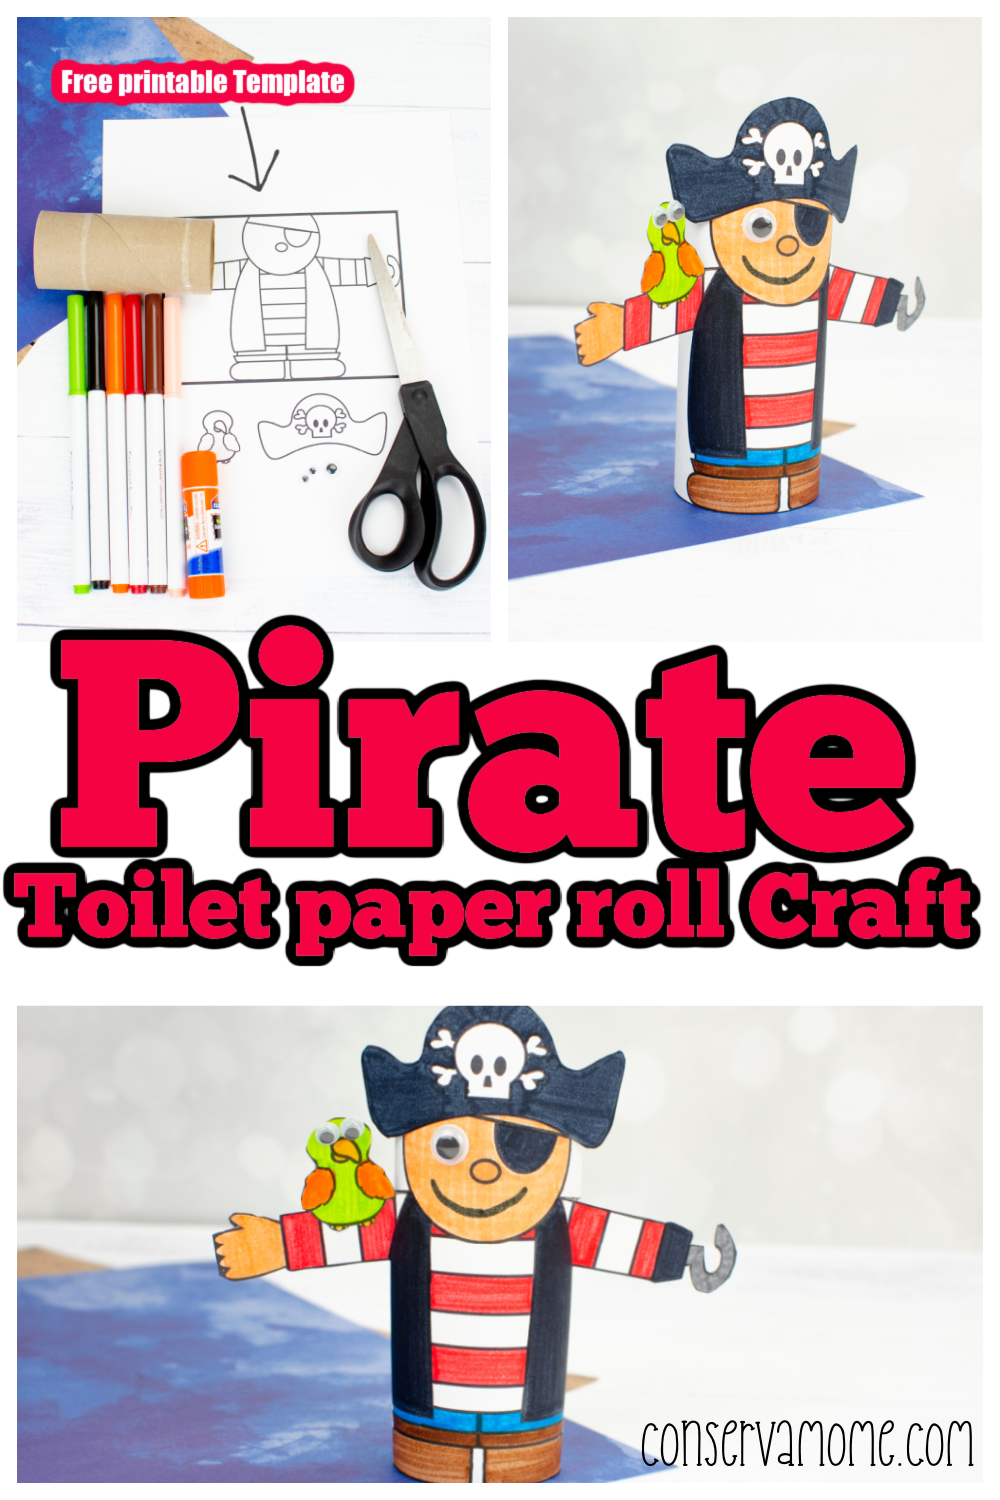 Toilet paper roll crafts